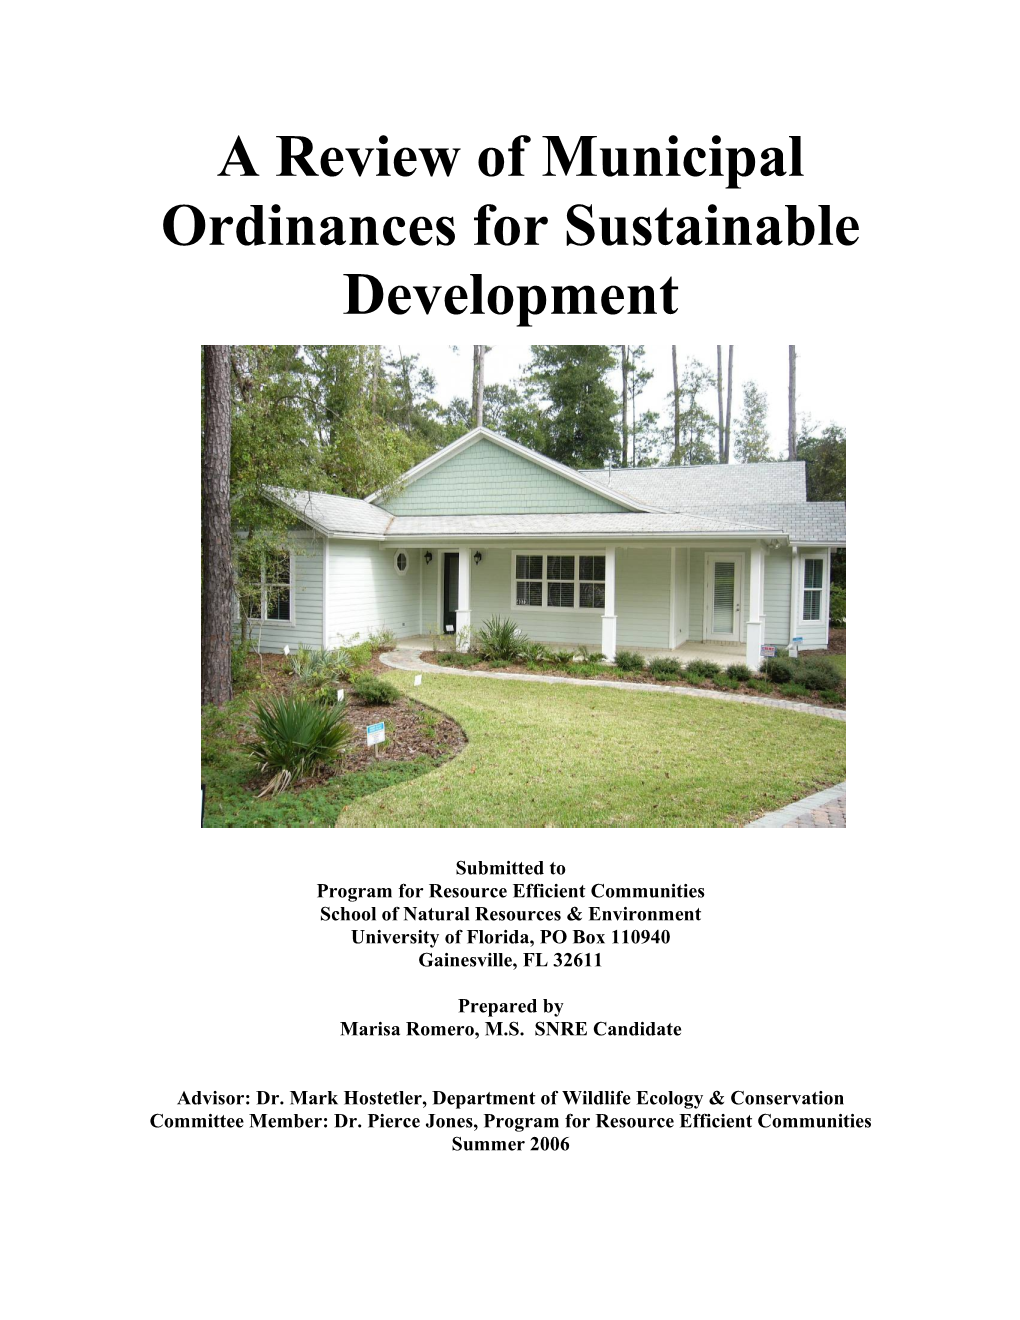 A Review of Municipal Ordinances for Sustainable Development